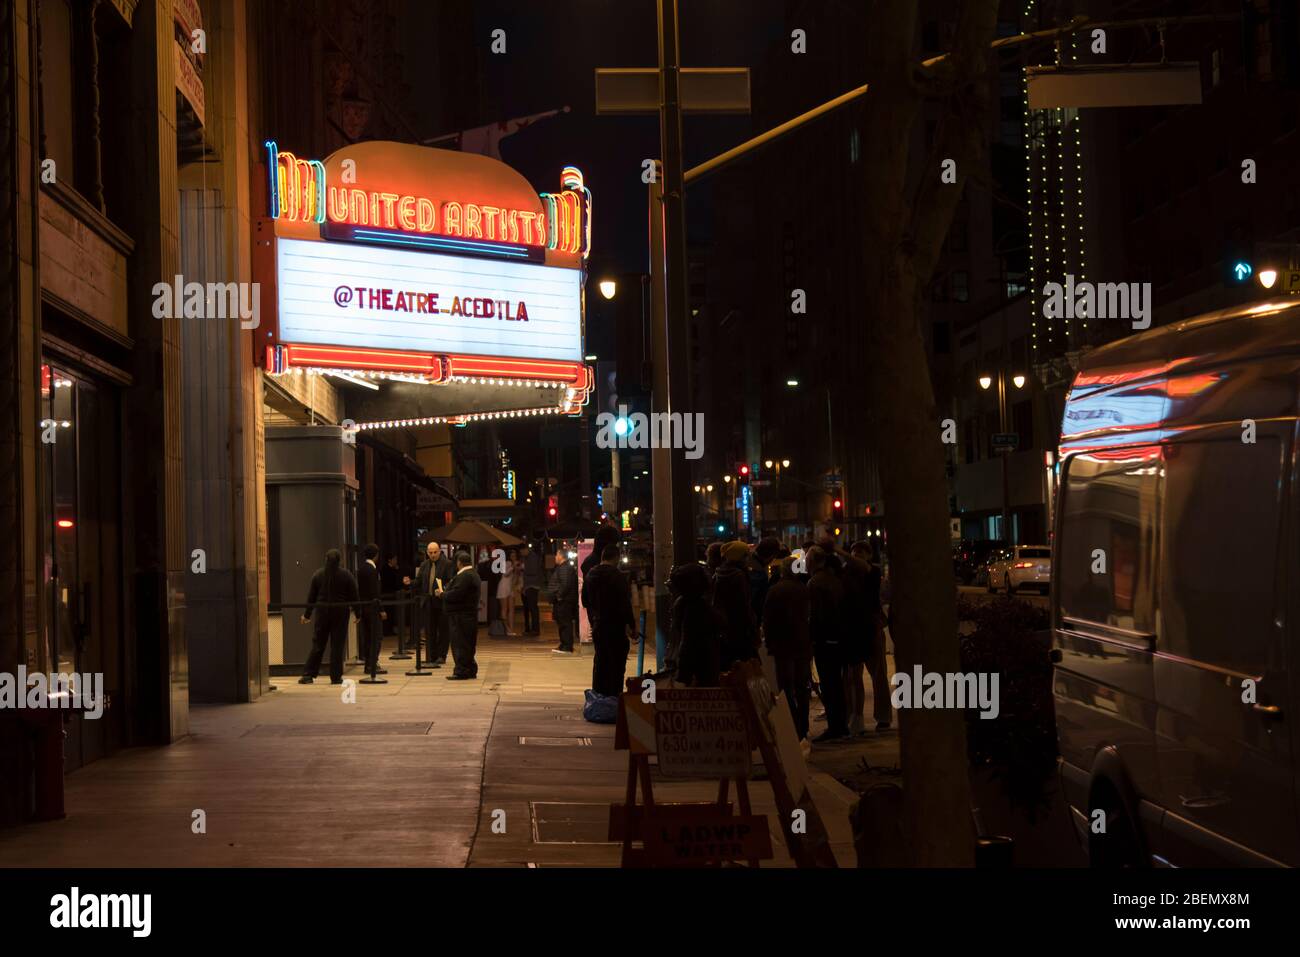 LOS ANGELES, CA/USA - FEBRUARY 16, 2019: The historic United Artists Theater in the Broadway Theatre District in Downtown Los Angeles. Stock Photo